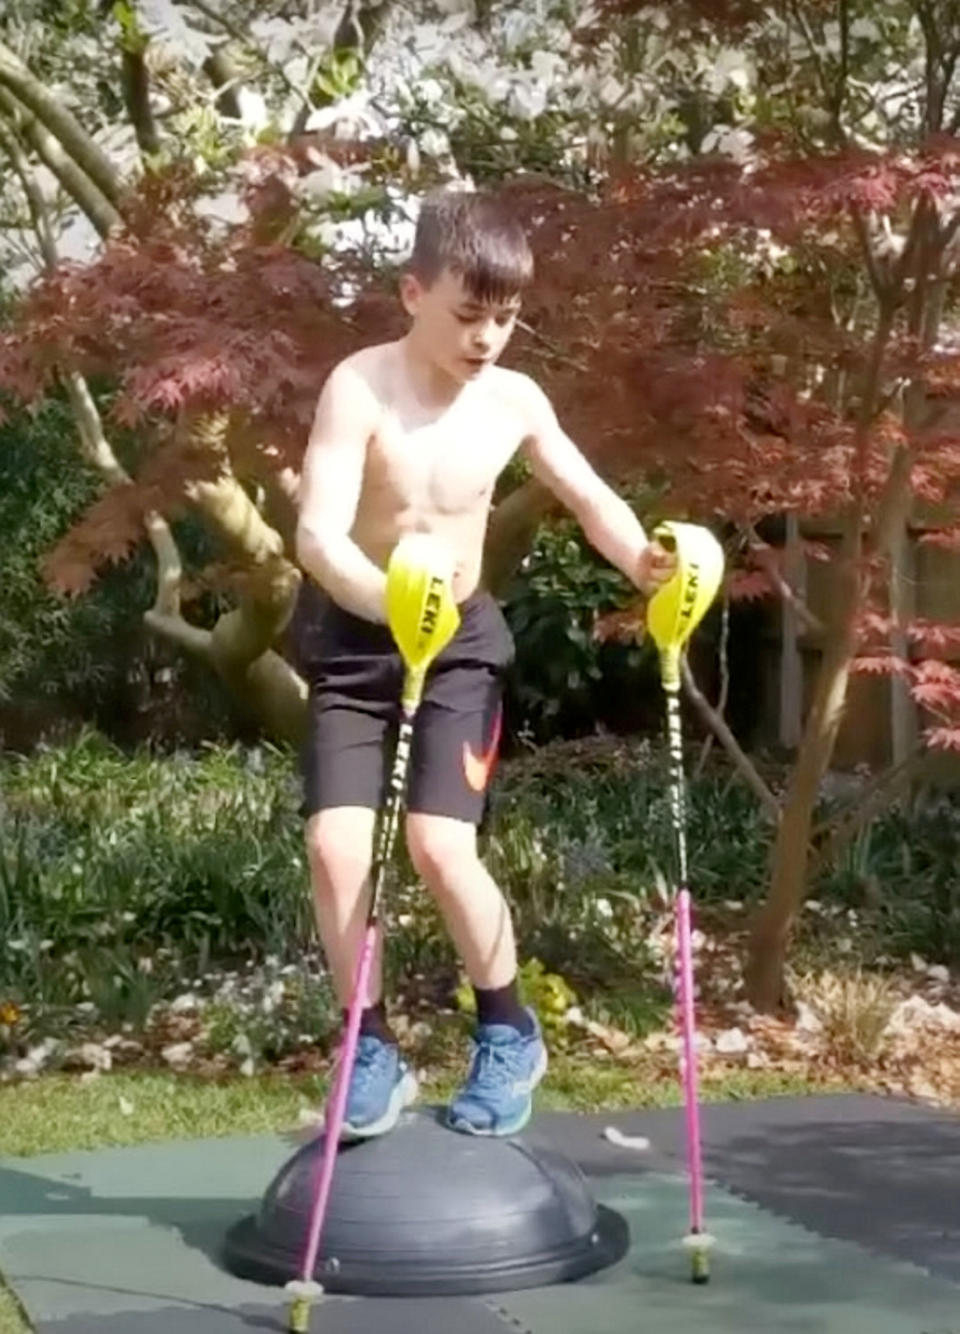 Eddie 'The Eagle' Edwards has backed schoolboy skiing ace George Brown in his bid for future Winter Olympic glory. The 13-year-old is the country’s top under-14 ski-racer who also competes on indoor dry slopes and slalom races across Europe. George and his dad Stuart, 46, have turned the garden of their home in Moseley, Birmingham, into a mini snow slope complete with jump off the back steps. His dedication to skiing has been noticed by legendary ski-jumper Eddie ‘The Eagle’ Edwards who is throwing his weight behind the youngster.